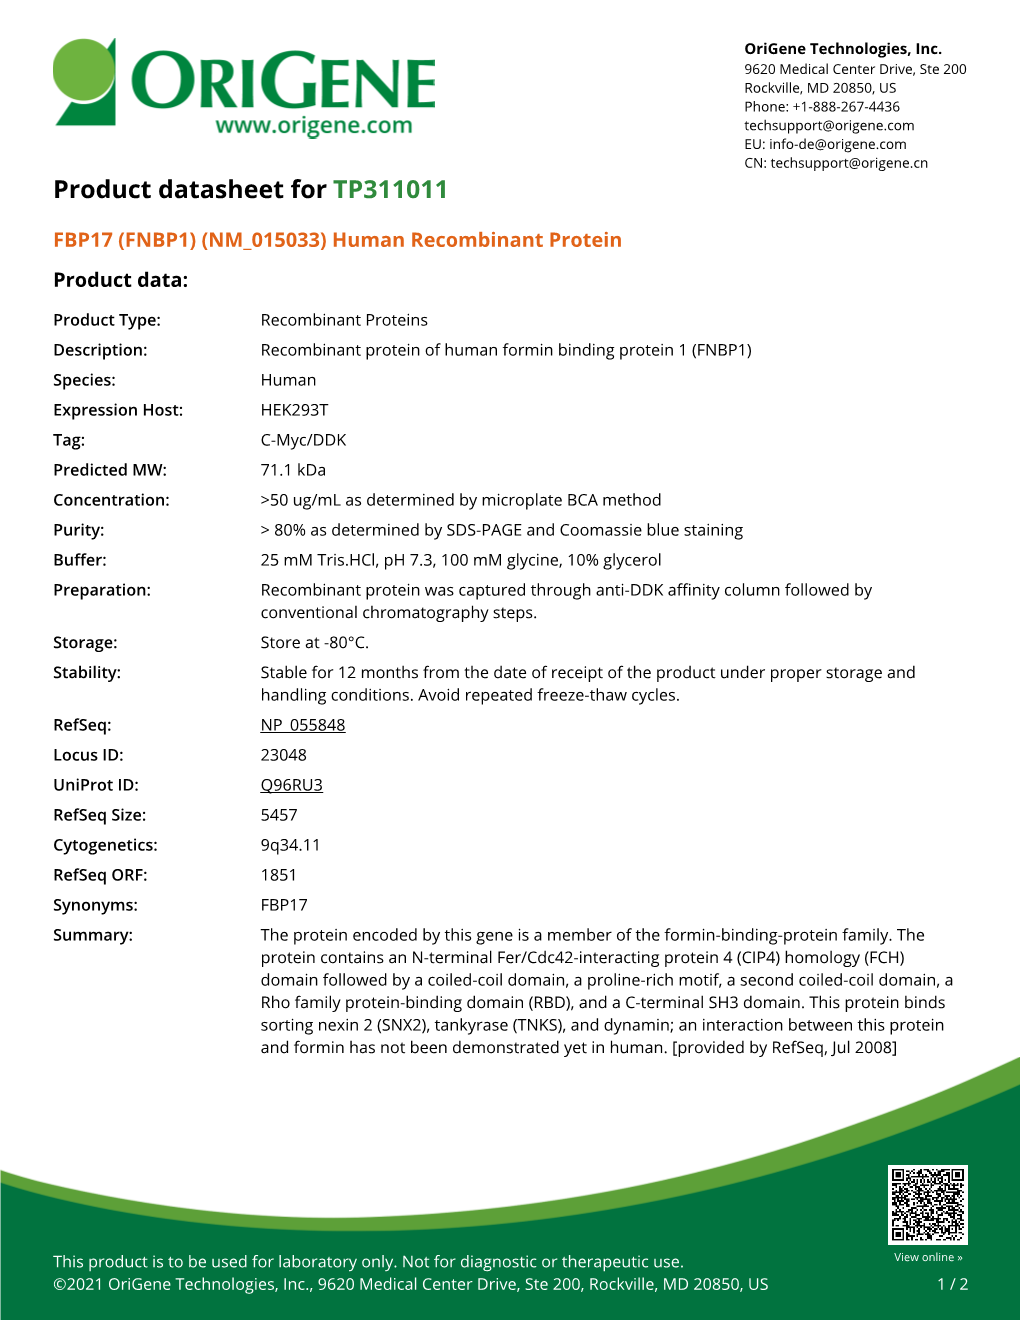 FBP17 (FNBP1) (NM 015033) Human Recombinant Protein Product Data